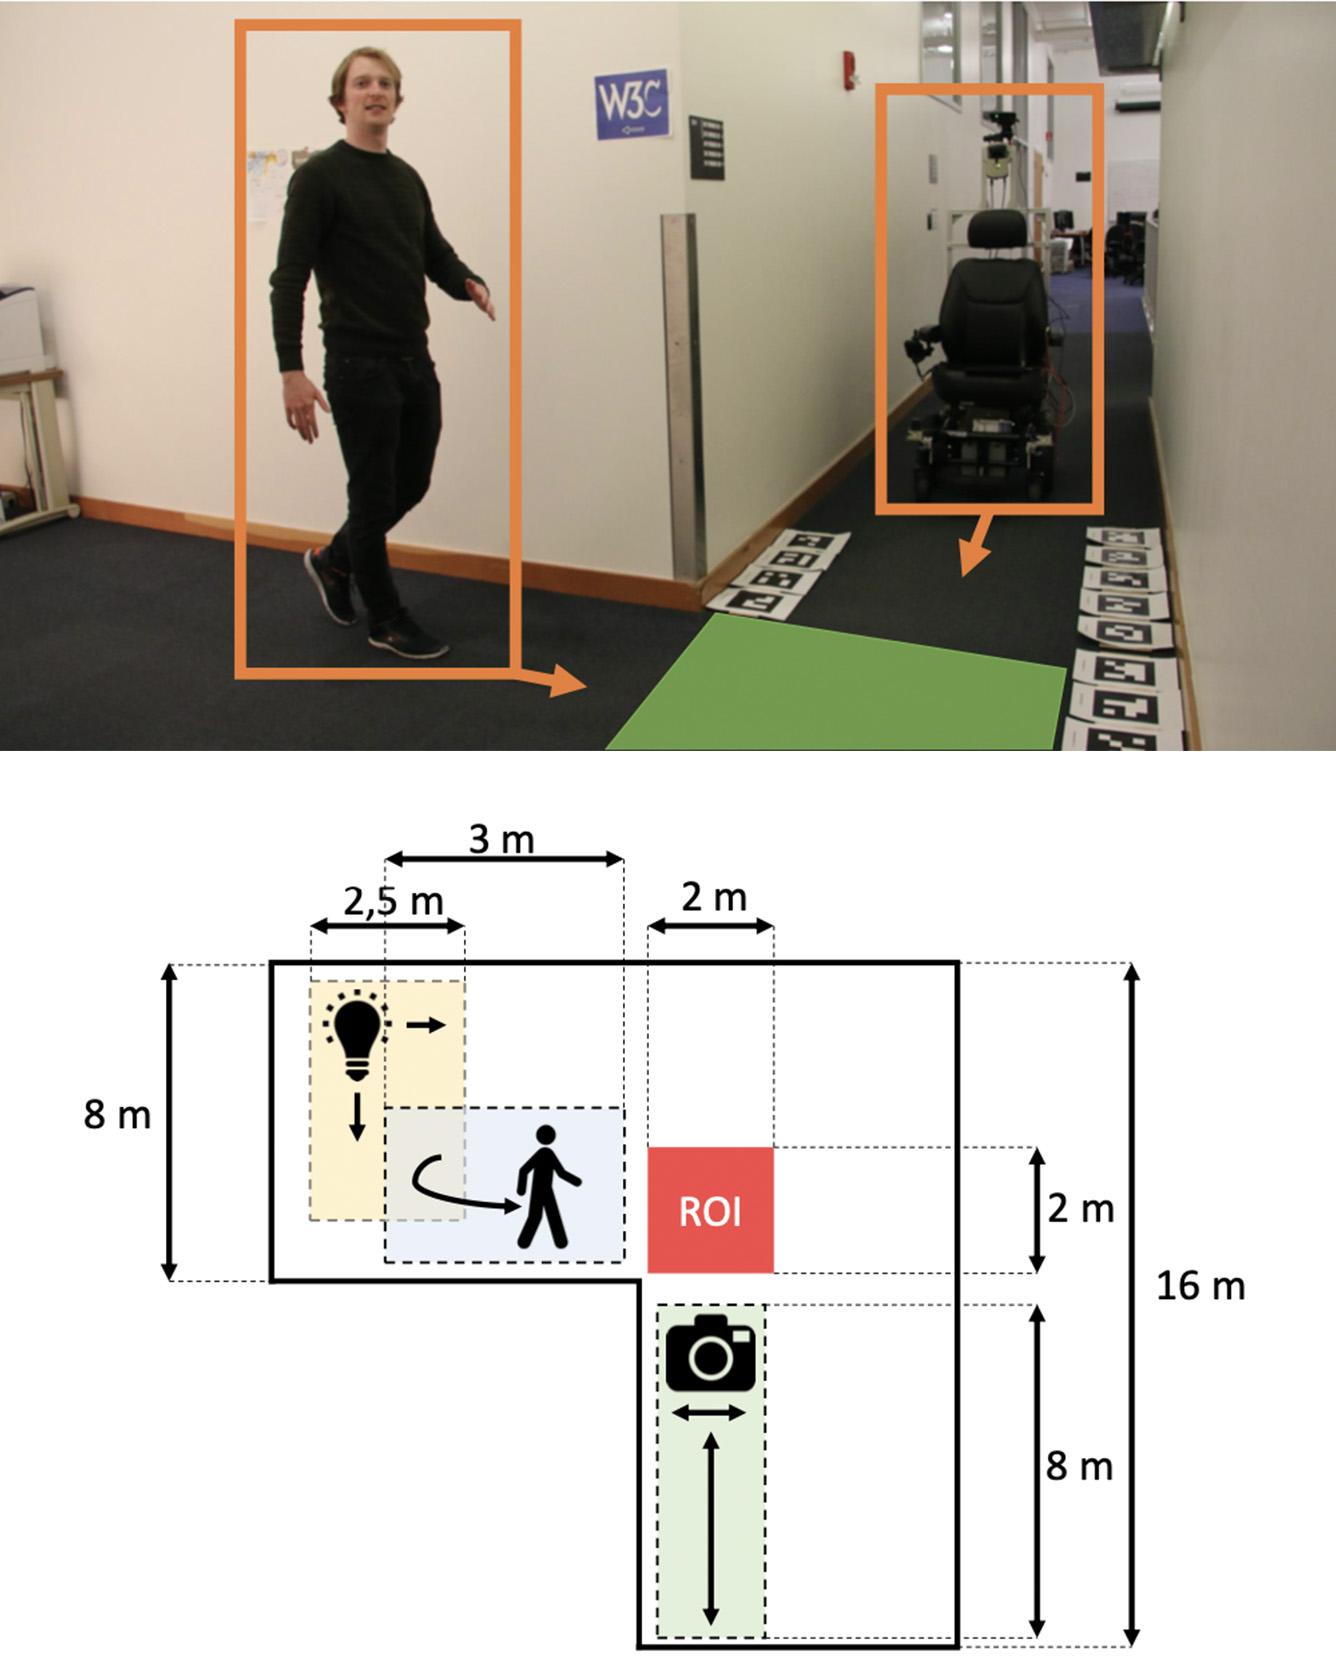 ShadowCam: Real‑Time Detection of Moving Obstacles Behind A Corner For Autonomous Vehicles